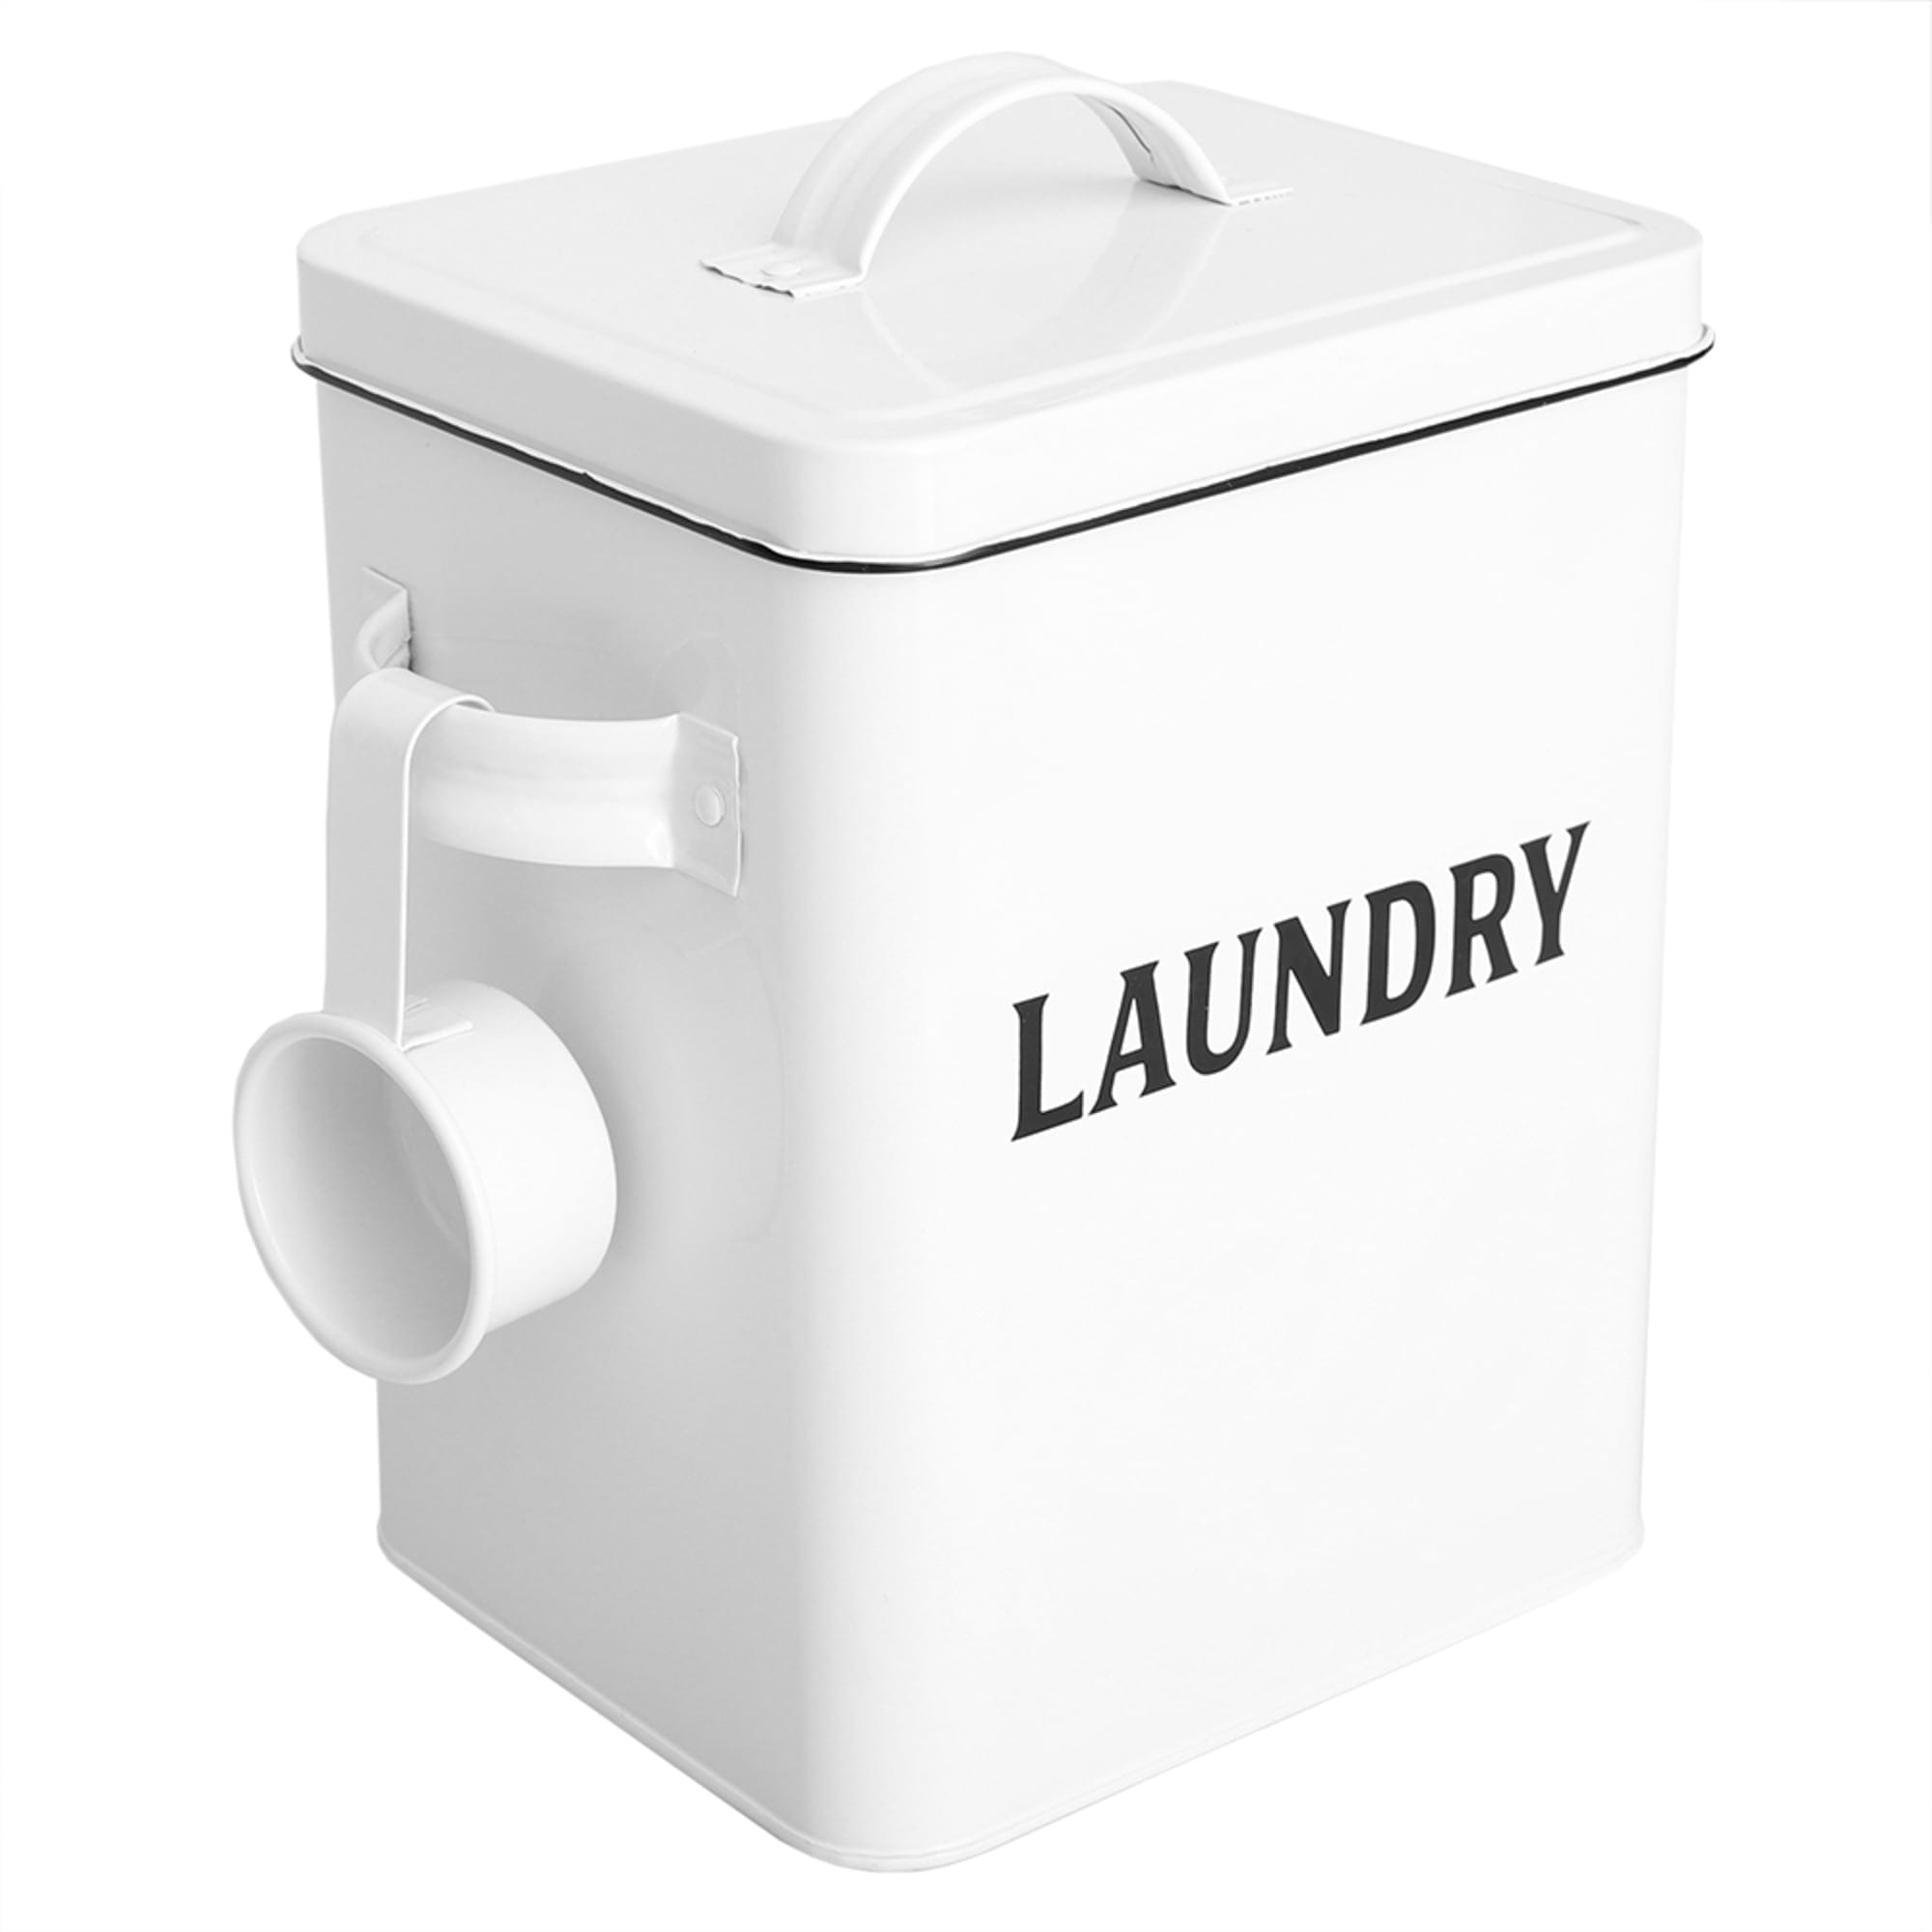 Home Basics Countryside Laundry Detergent Tin Holder with Scoop, White $8.00 EACH, CASE PACK OF 8